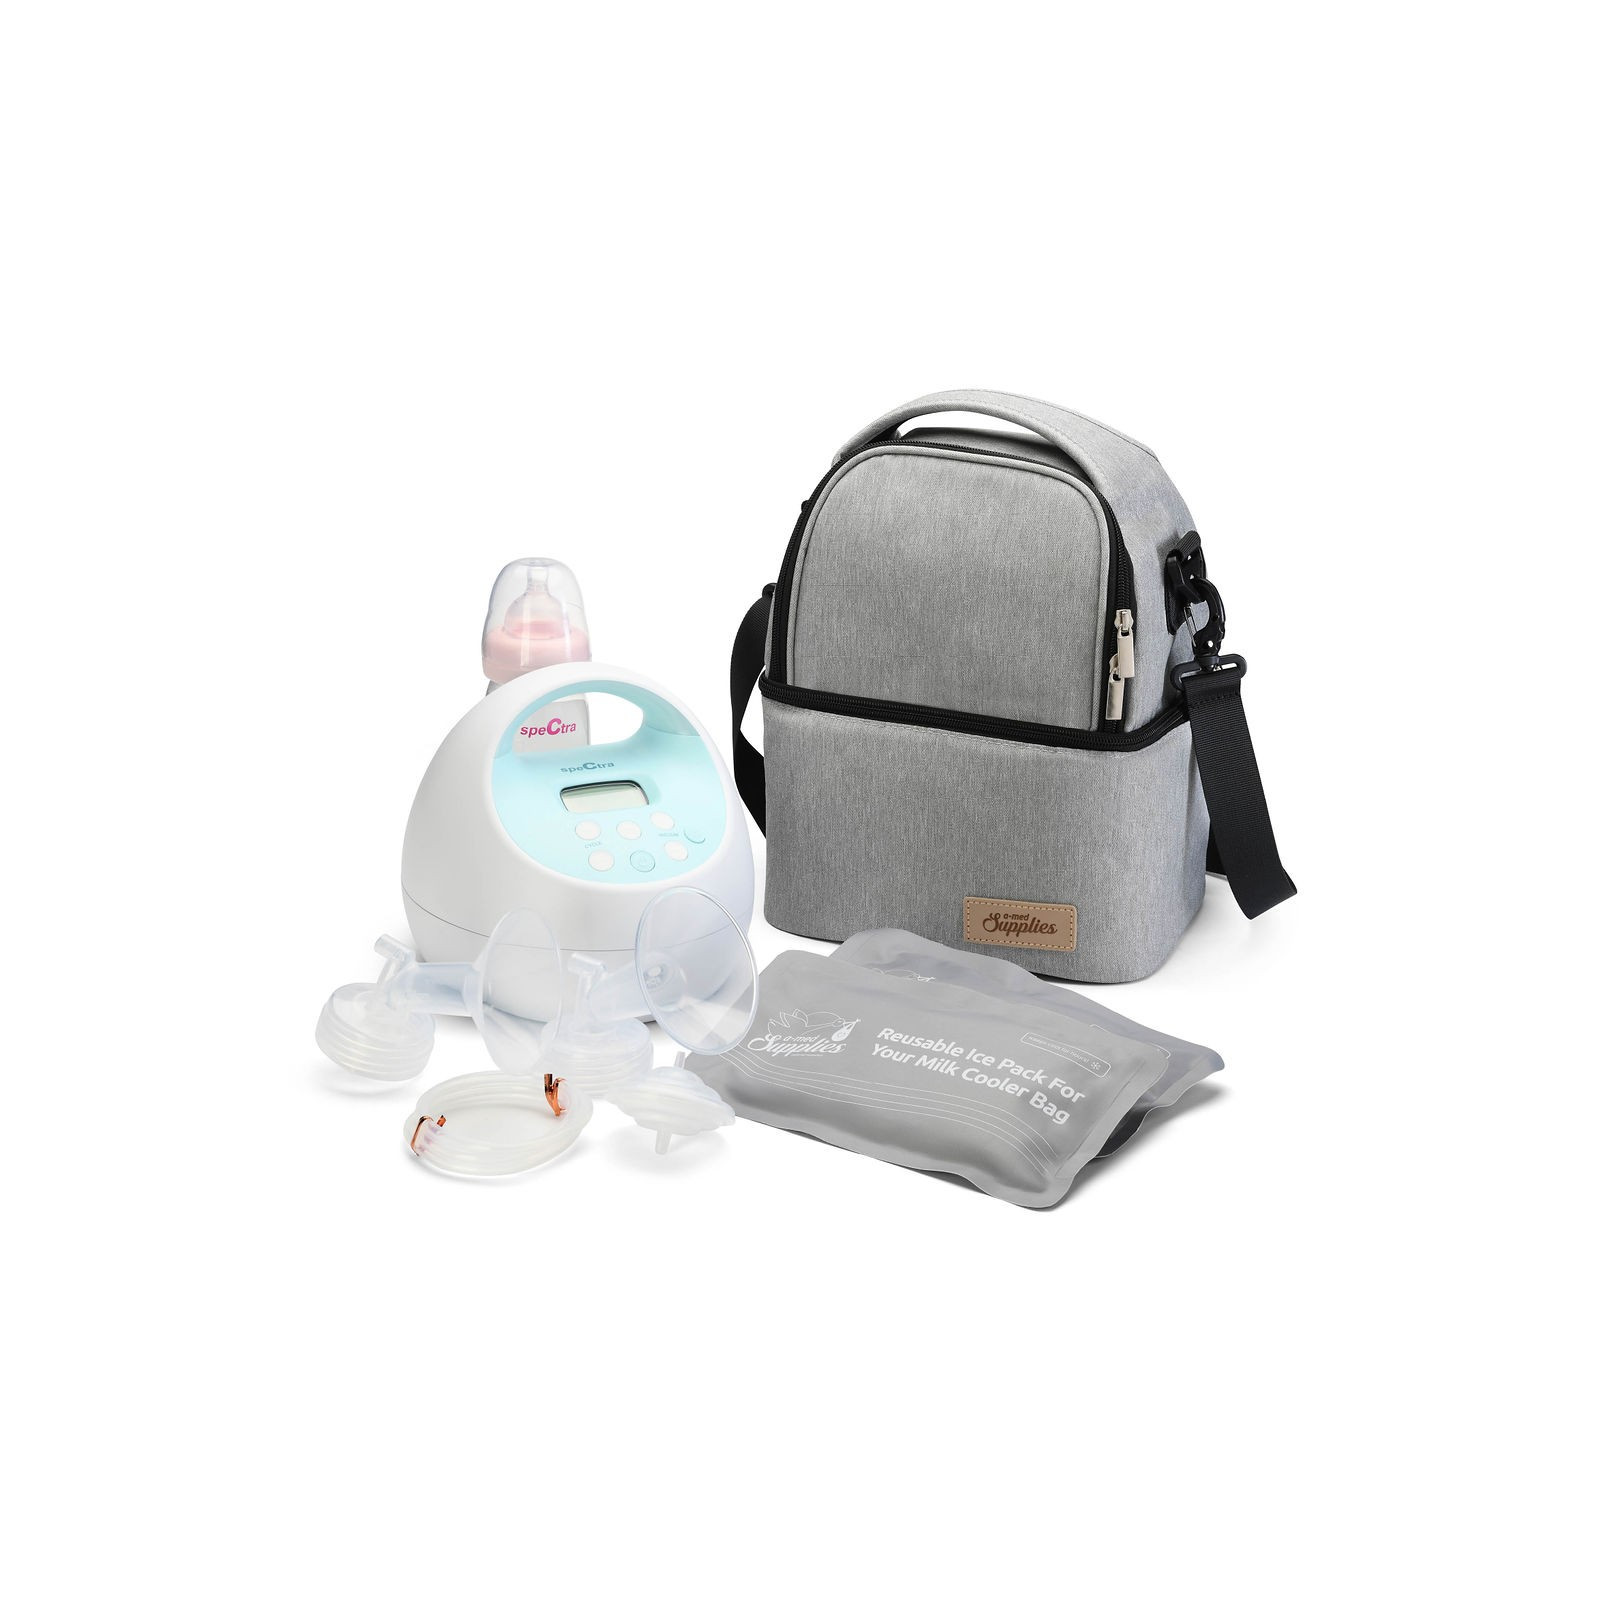 https://amedsupplies.com/1499-original/spectra-s2-double-electric-breast-pump-with-tote-and-cooler-.jpg